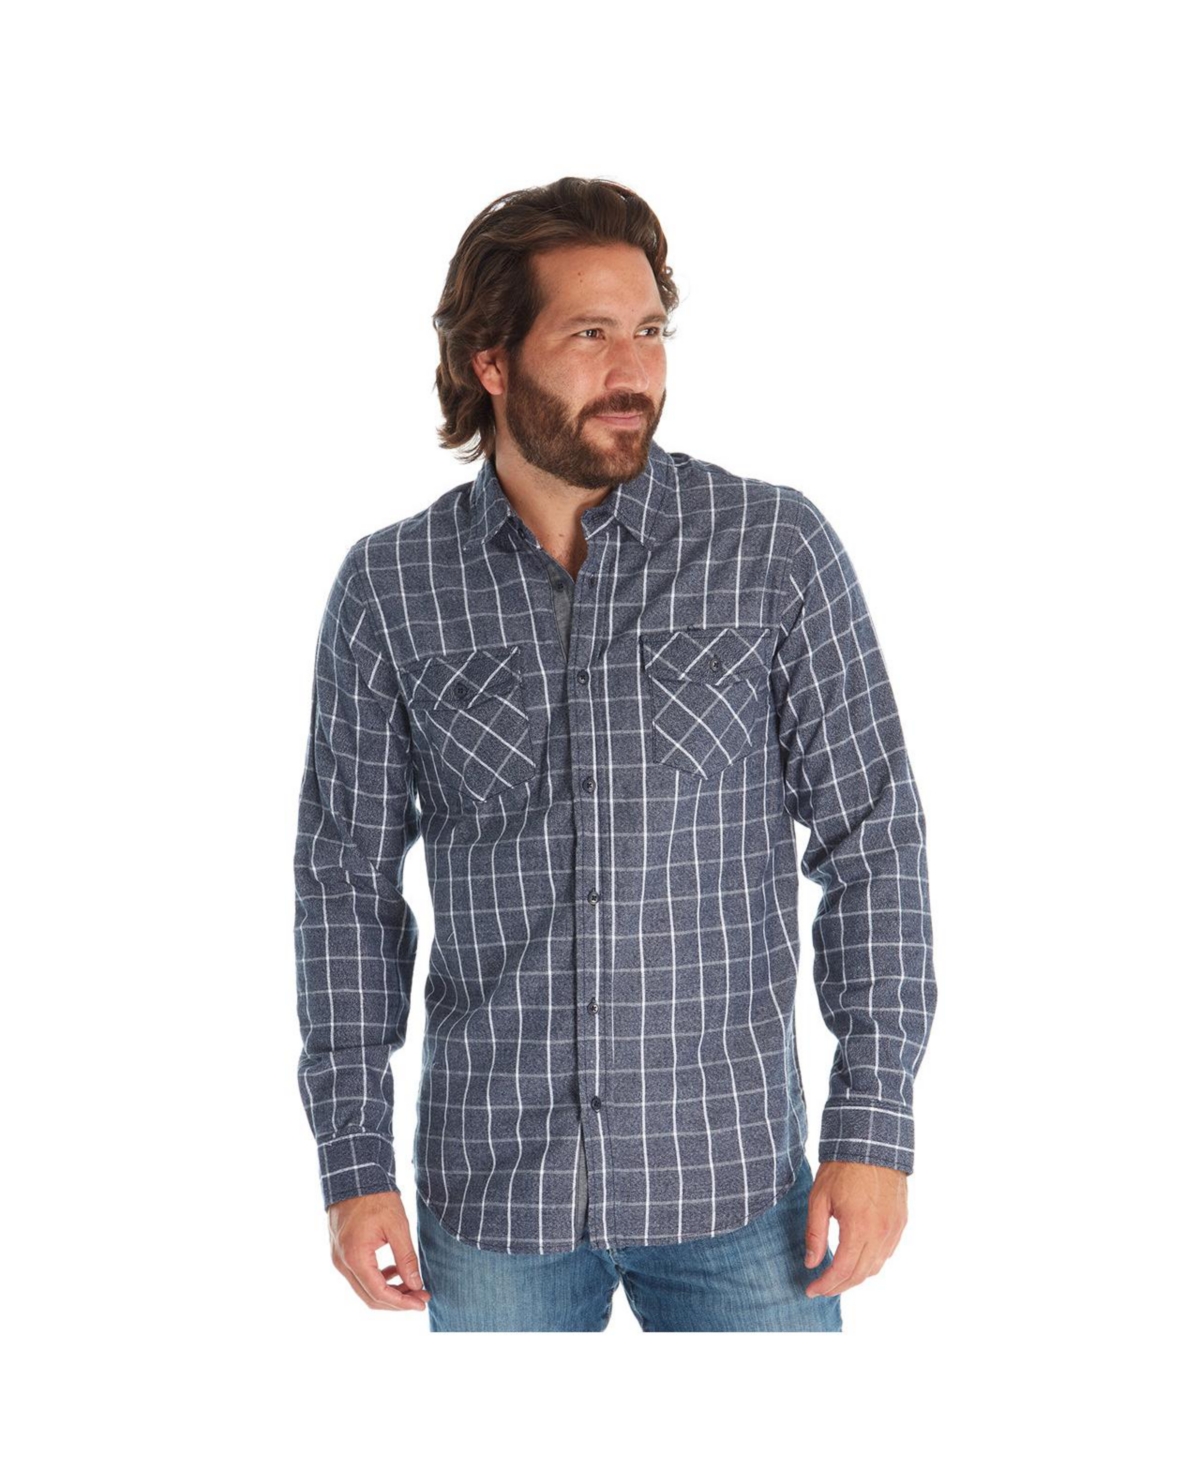 Clothing Men's Flannel Long Sleeves Shirt - Navy